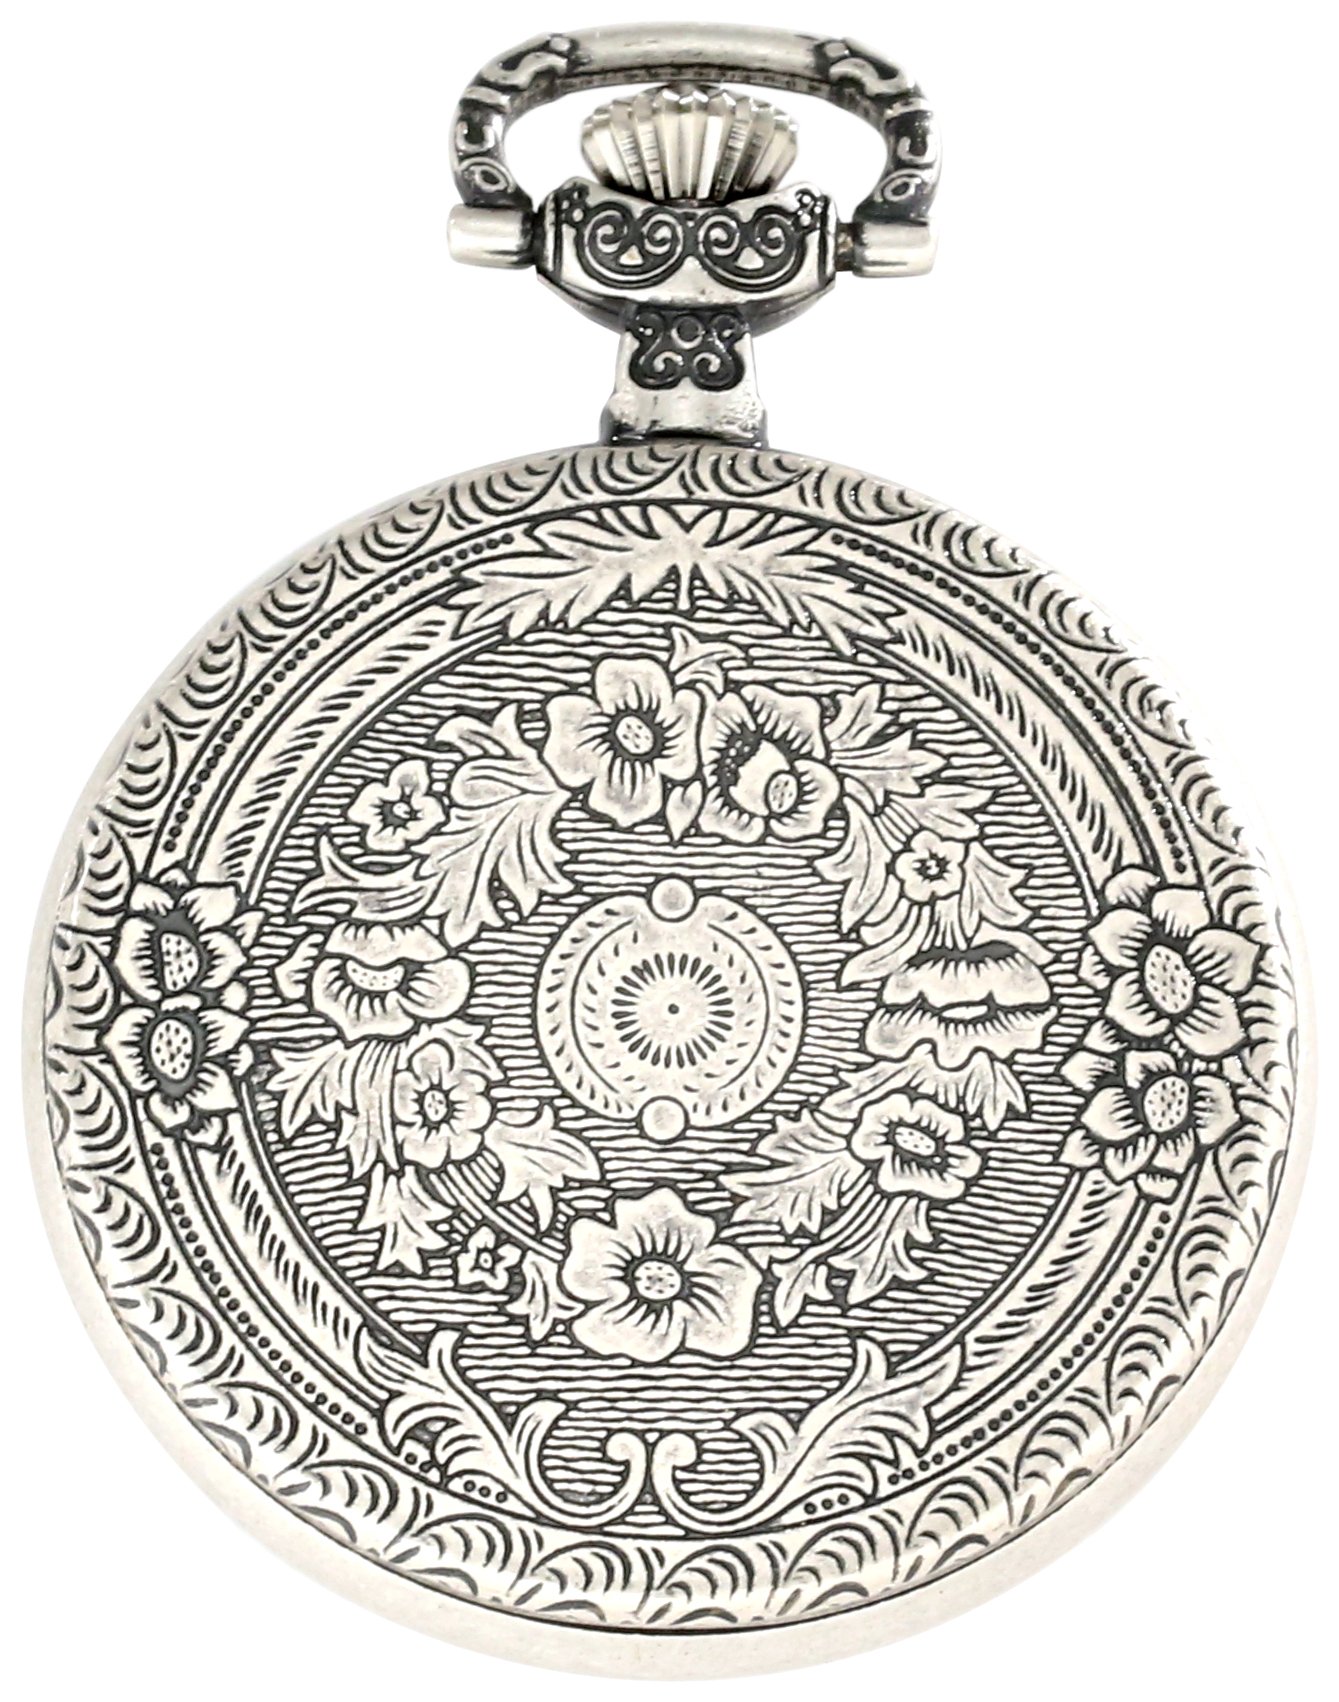 Charles-Hubert, Paris 3921 Classic Collection Antique Silver Plated Brass Mechanical Pocket Watch